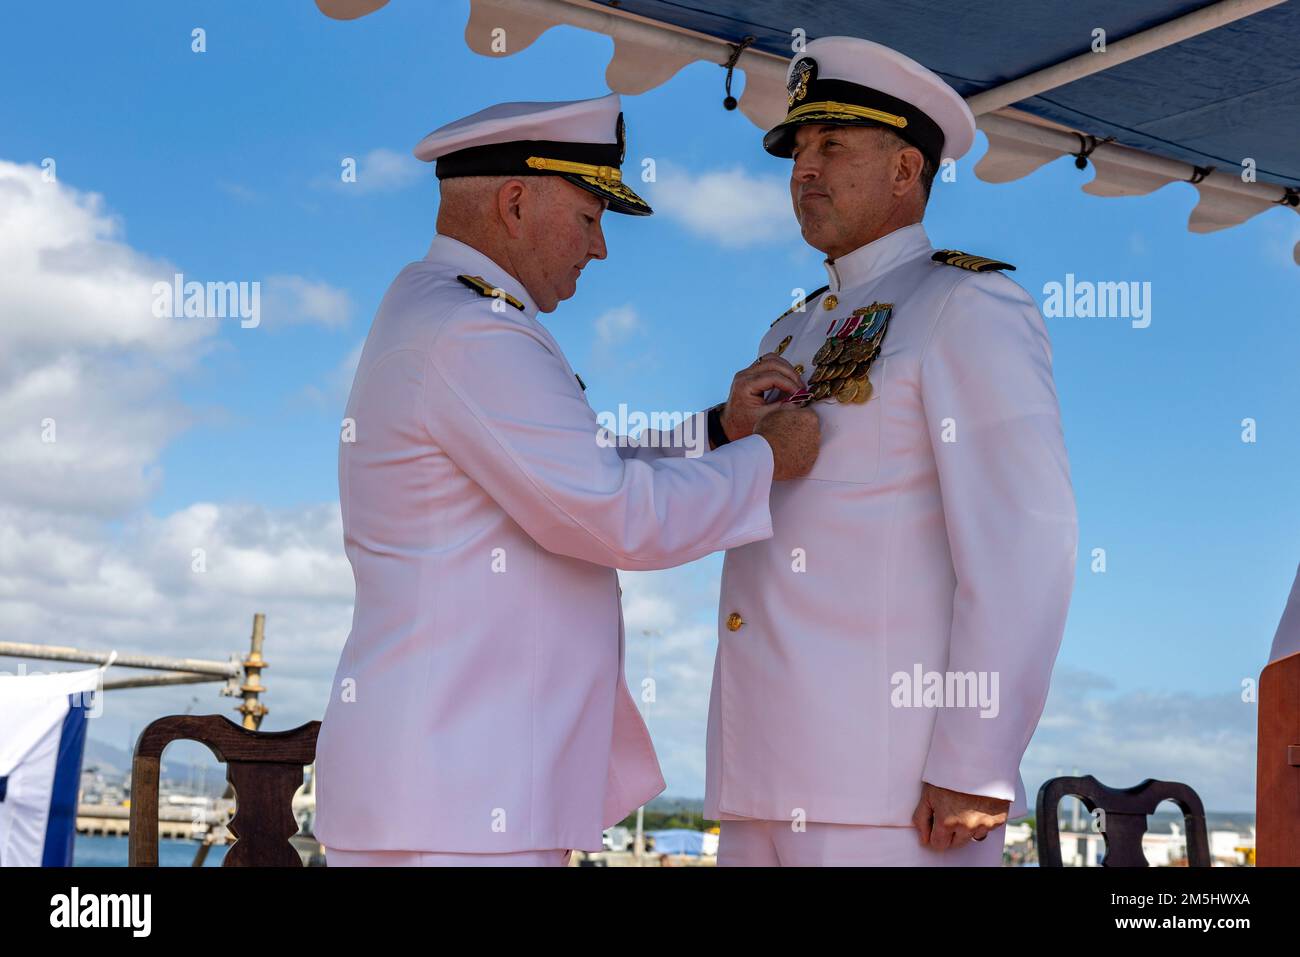 220318-N-OT701-1050 JOINT BASE PEARL HARBOR-HICKAM (Mar. 18, 2021) Rear Adm. Timothy Kott, Commander, Naval Surface Group Middle Pacific, pins a Legion of Merit award on Capt. Ken Athans during a change of command ceremony. Athans was relieved by Capt. Don Rauch as Commander, Destroyer Squadron 31 during the ceremony. Stock Photo